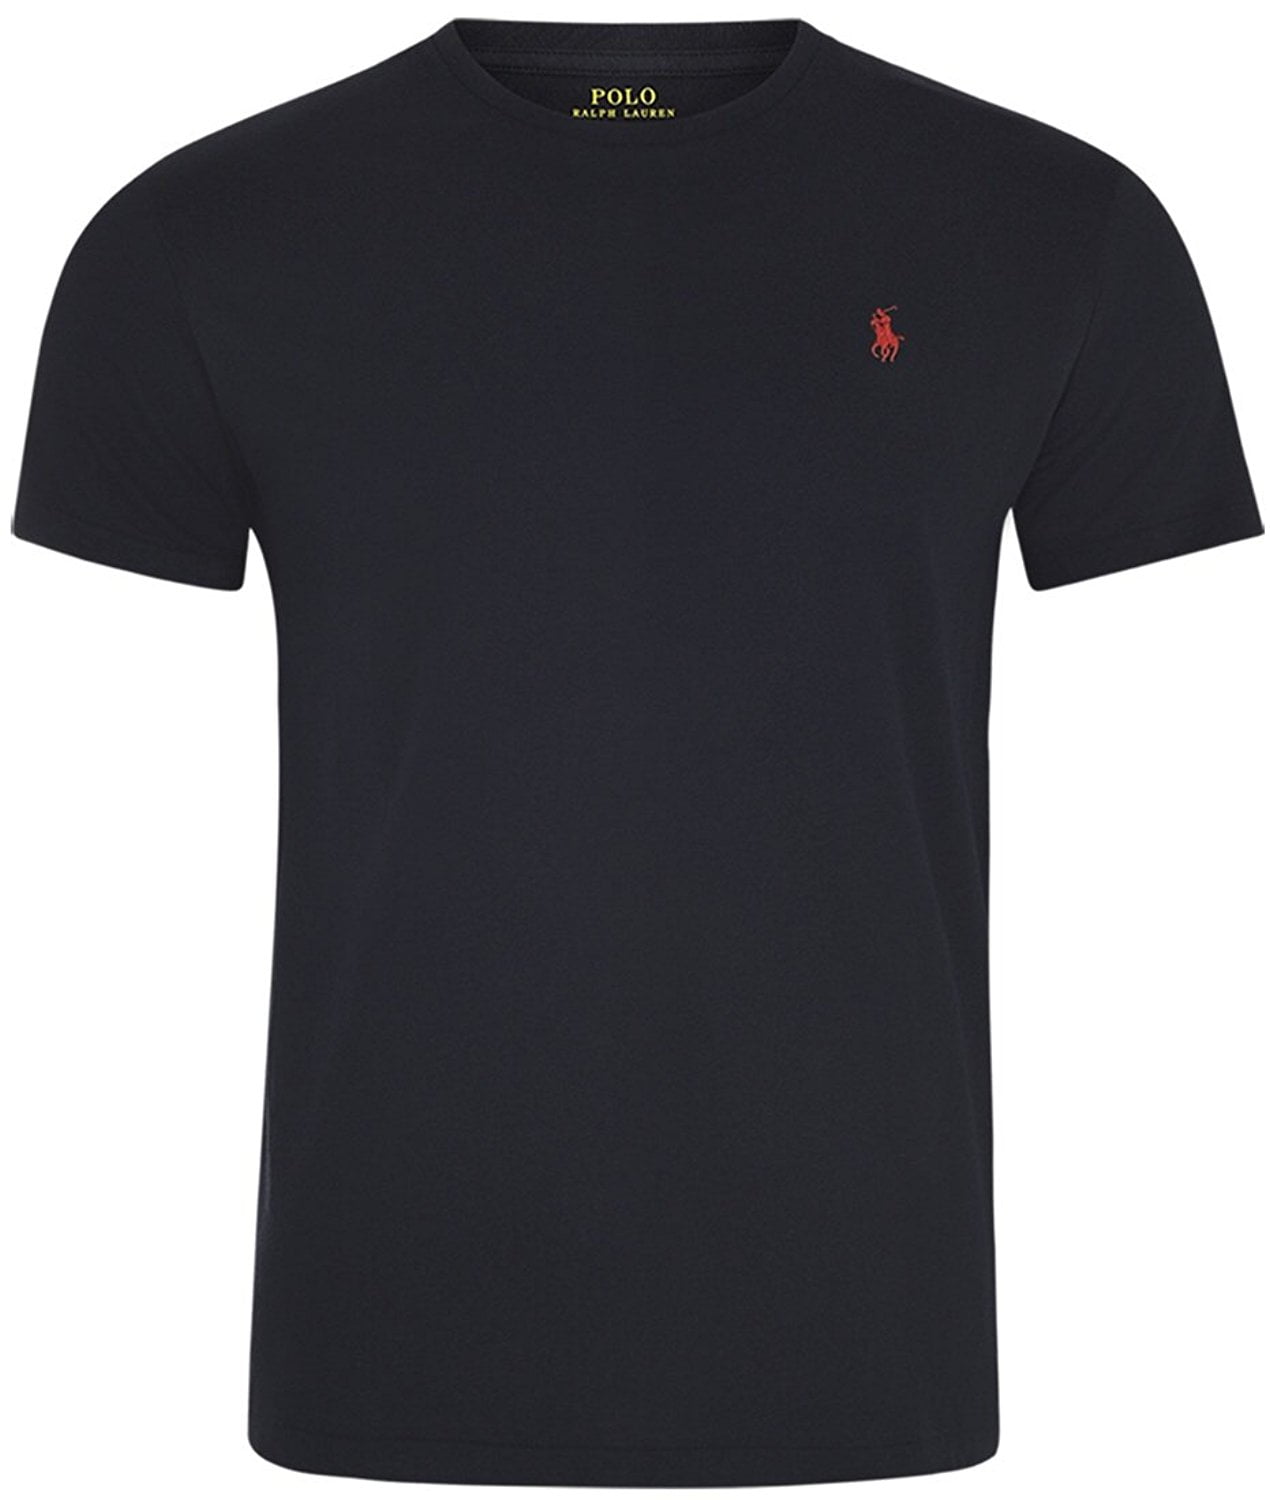 polo by ralph lauren t shirts